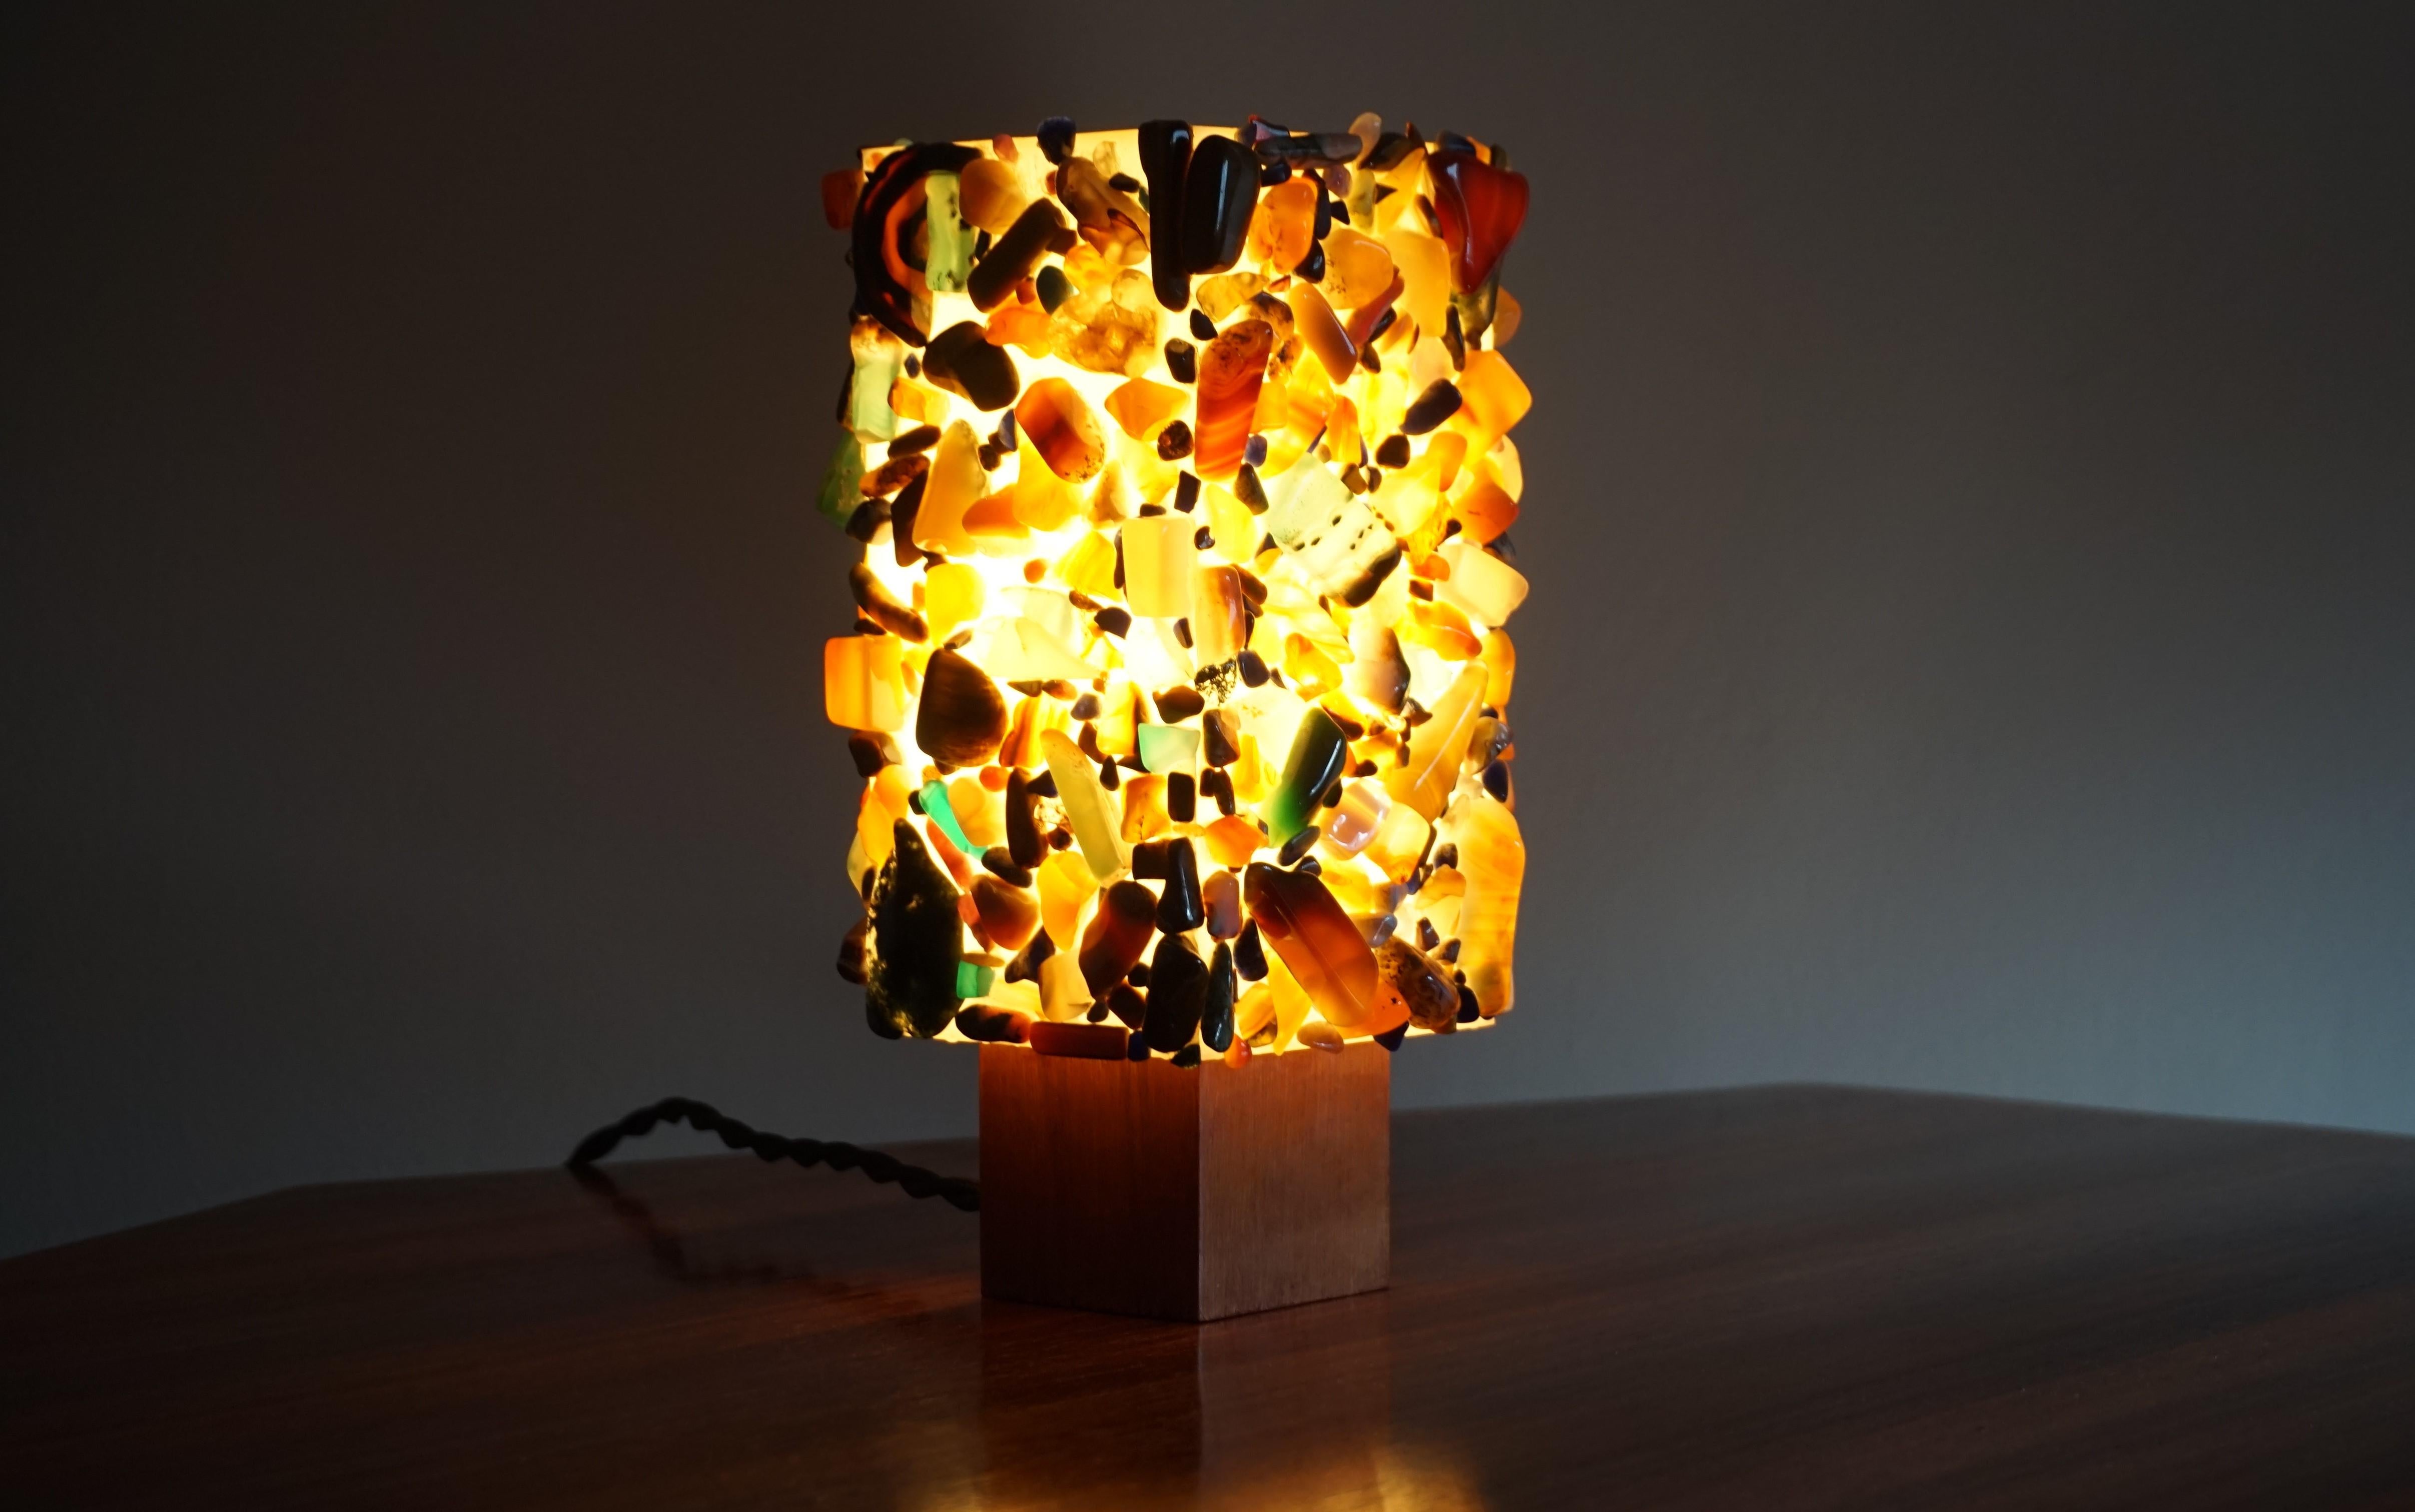 Unique, vibrant and superb condition, 1960s table lamp with marvelous colors.

Both with the light switched on and off, this colorful and highly stylish midcentury table lamp is an absolute joy to own and look at. All handcrafted with the use of